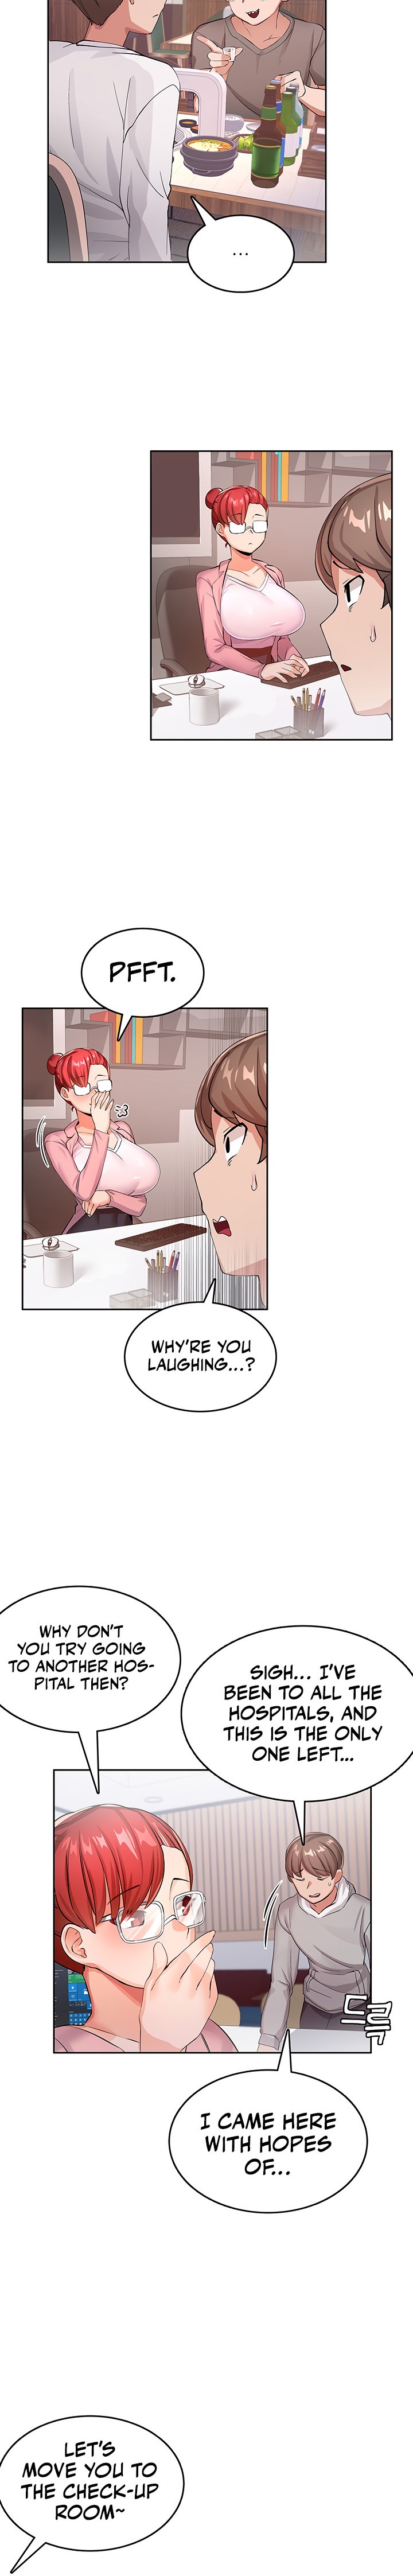 Relationship Reverse Button: Let’s Cure That Arrogant Girl - Chapter 1 Page 6